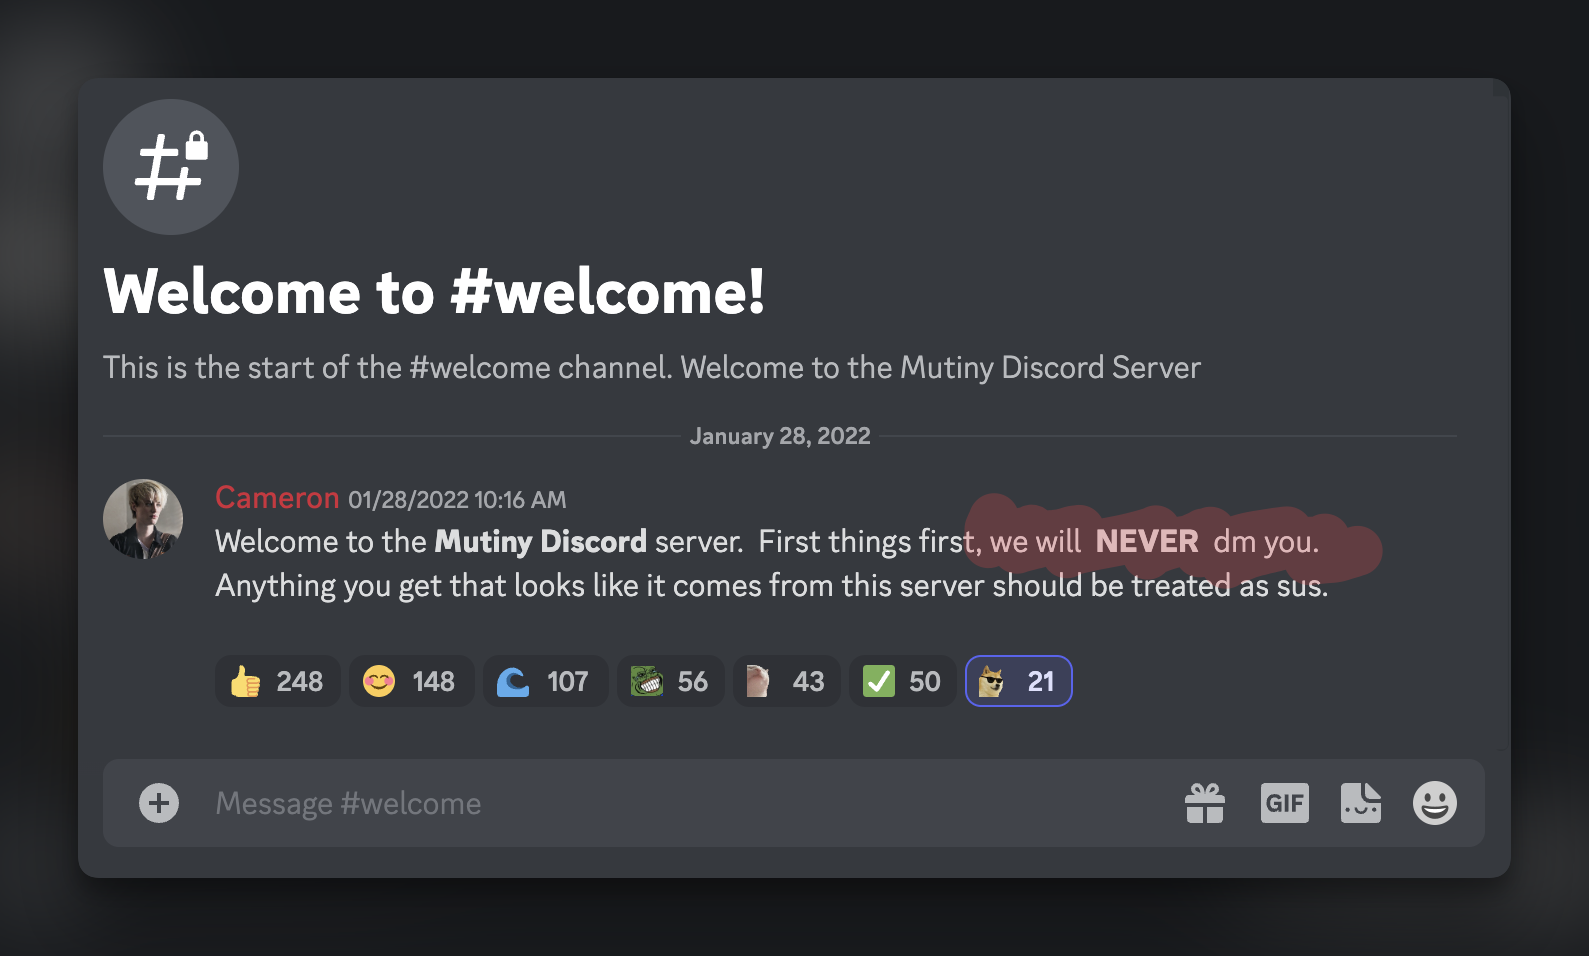 We will never DM you message in Mutiny Discord